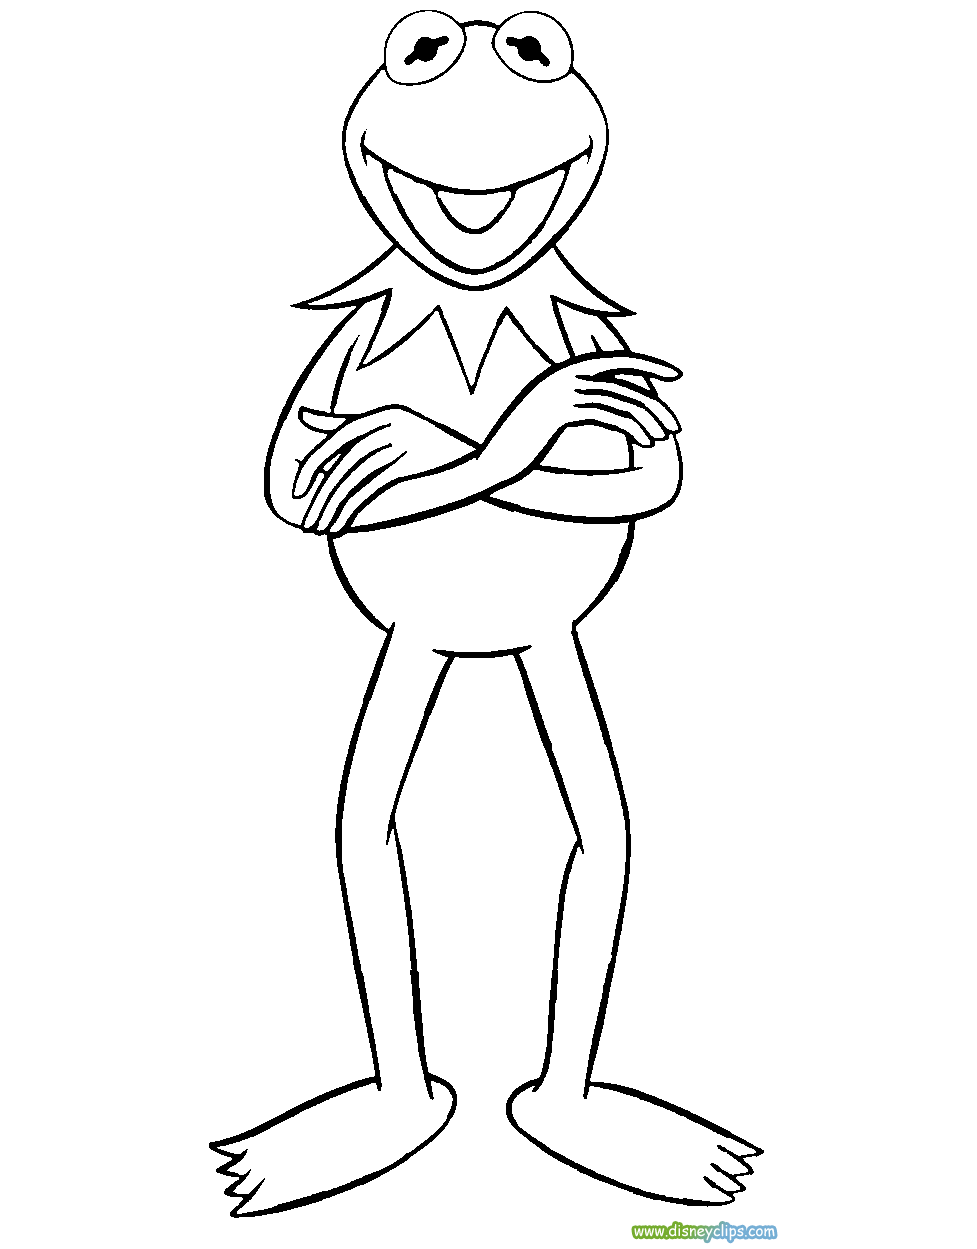 kermit the frog coloring pages 67 best sesame street coloring pages images on pinterest coloring the kermit pages frog 